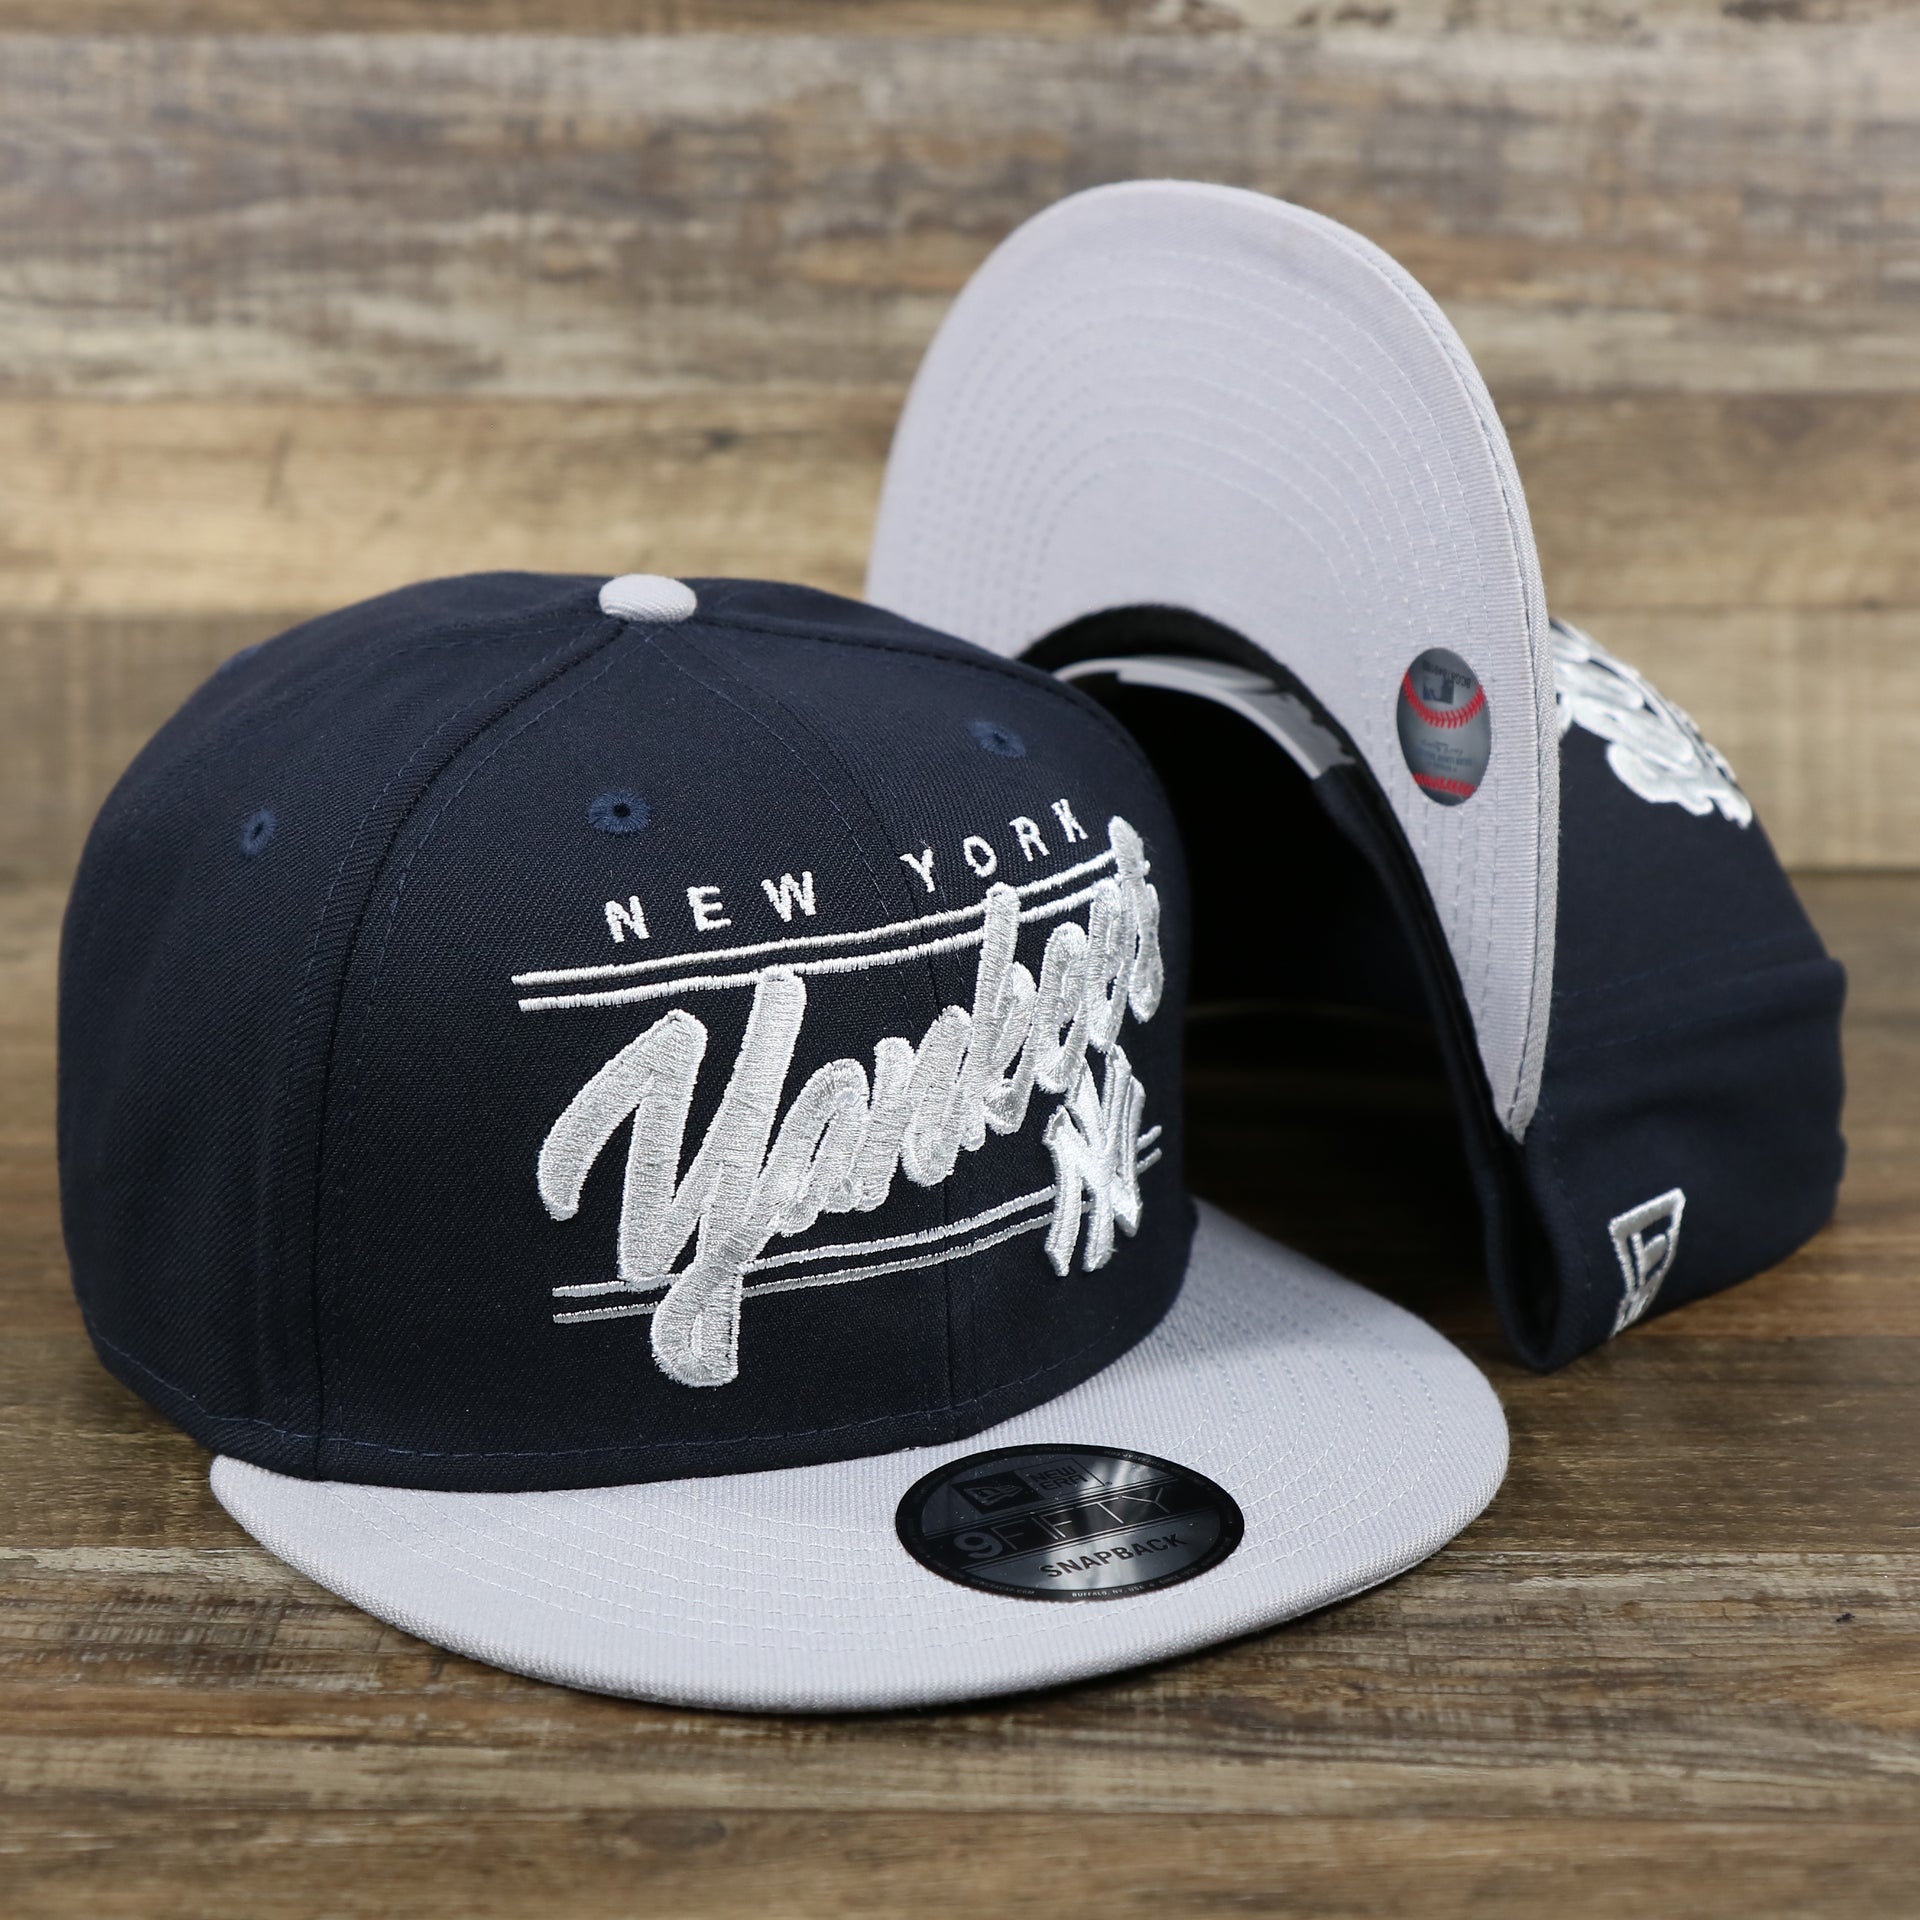 The New York Yankees "Team Script" College Bar Style 9Fifty Snapback Hat | Current Logo, Navy/Grey